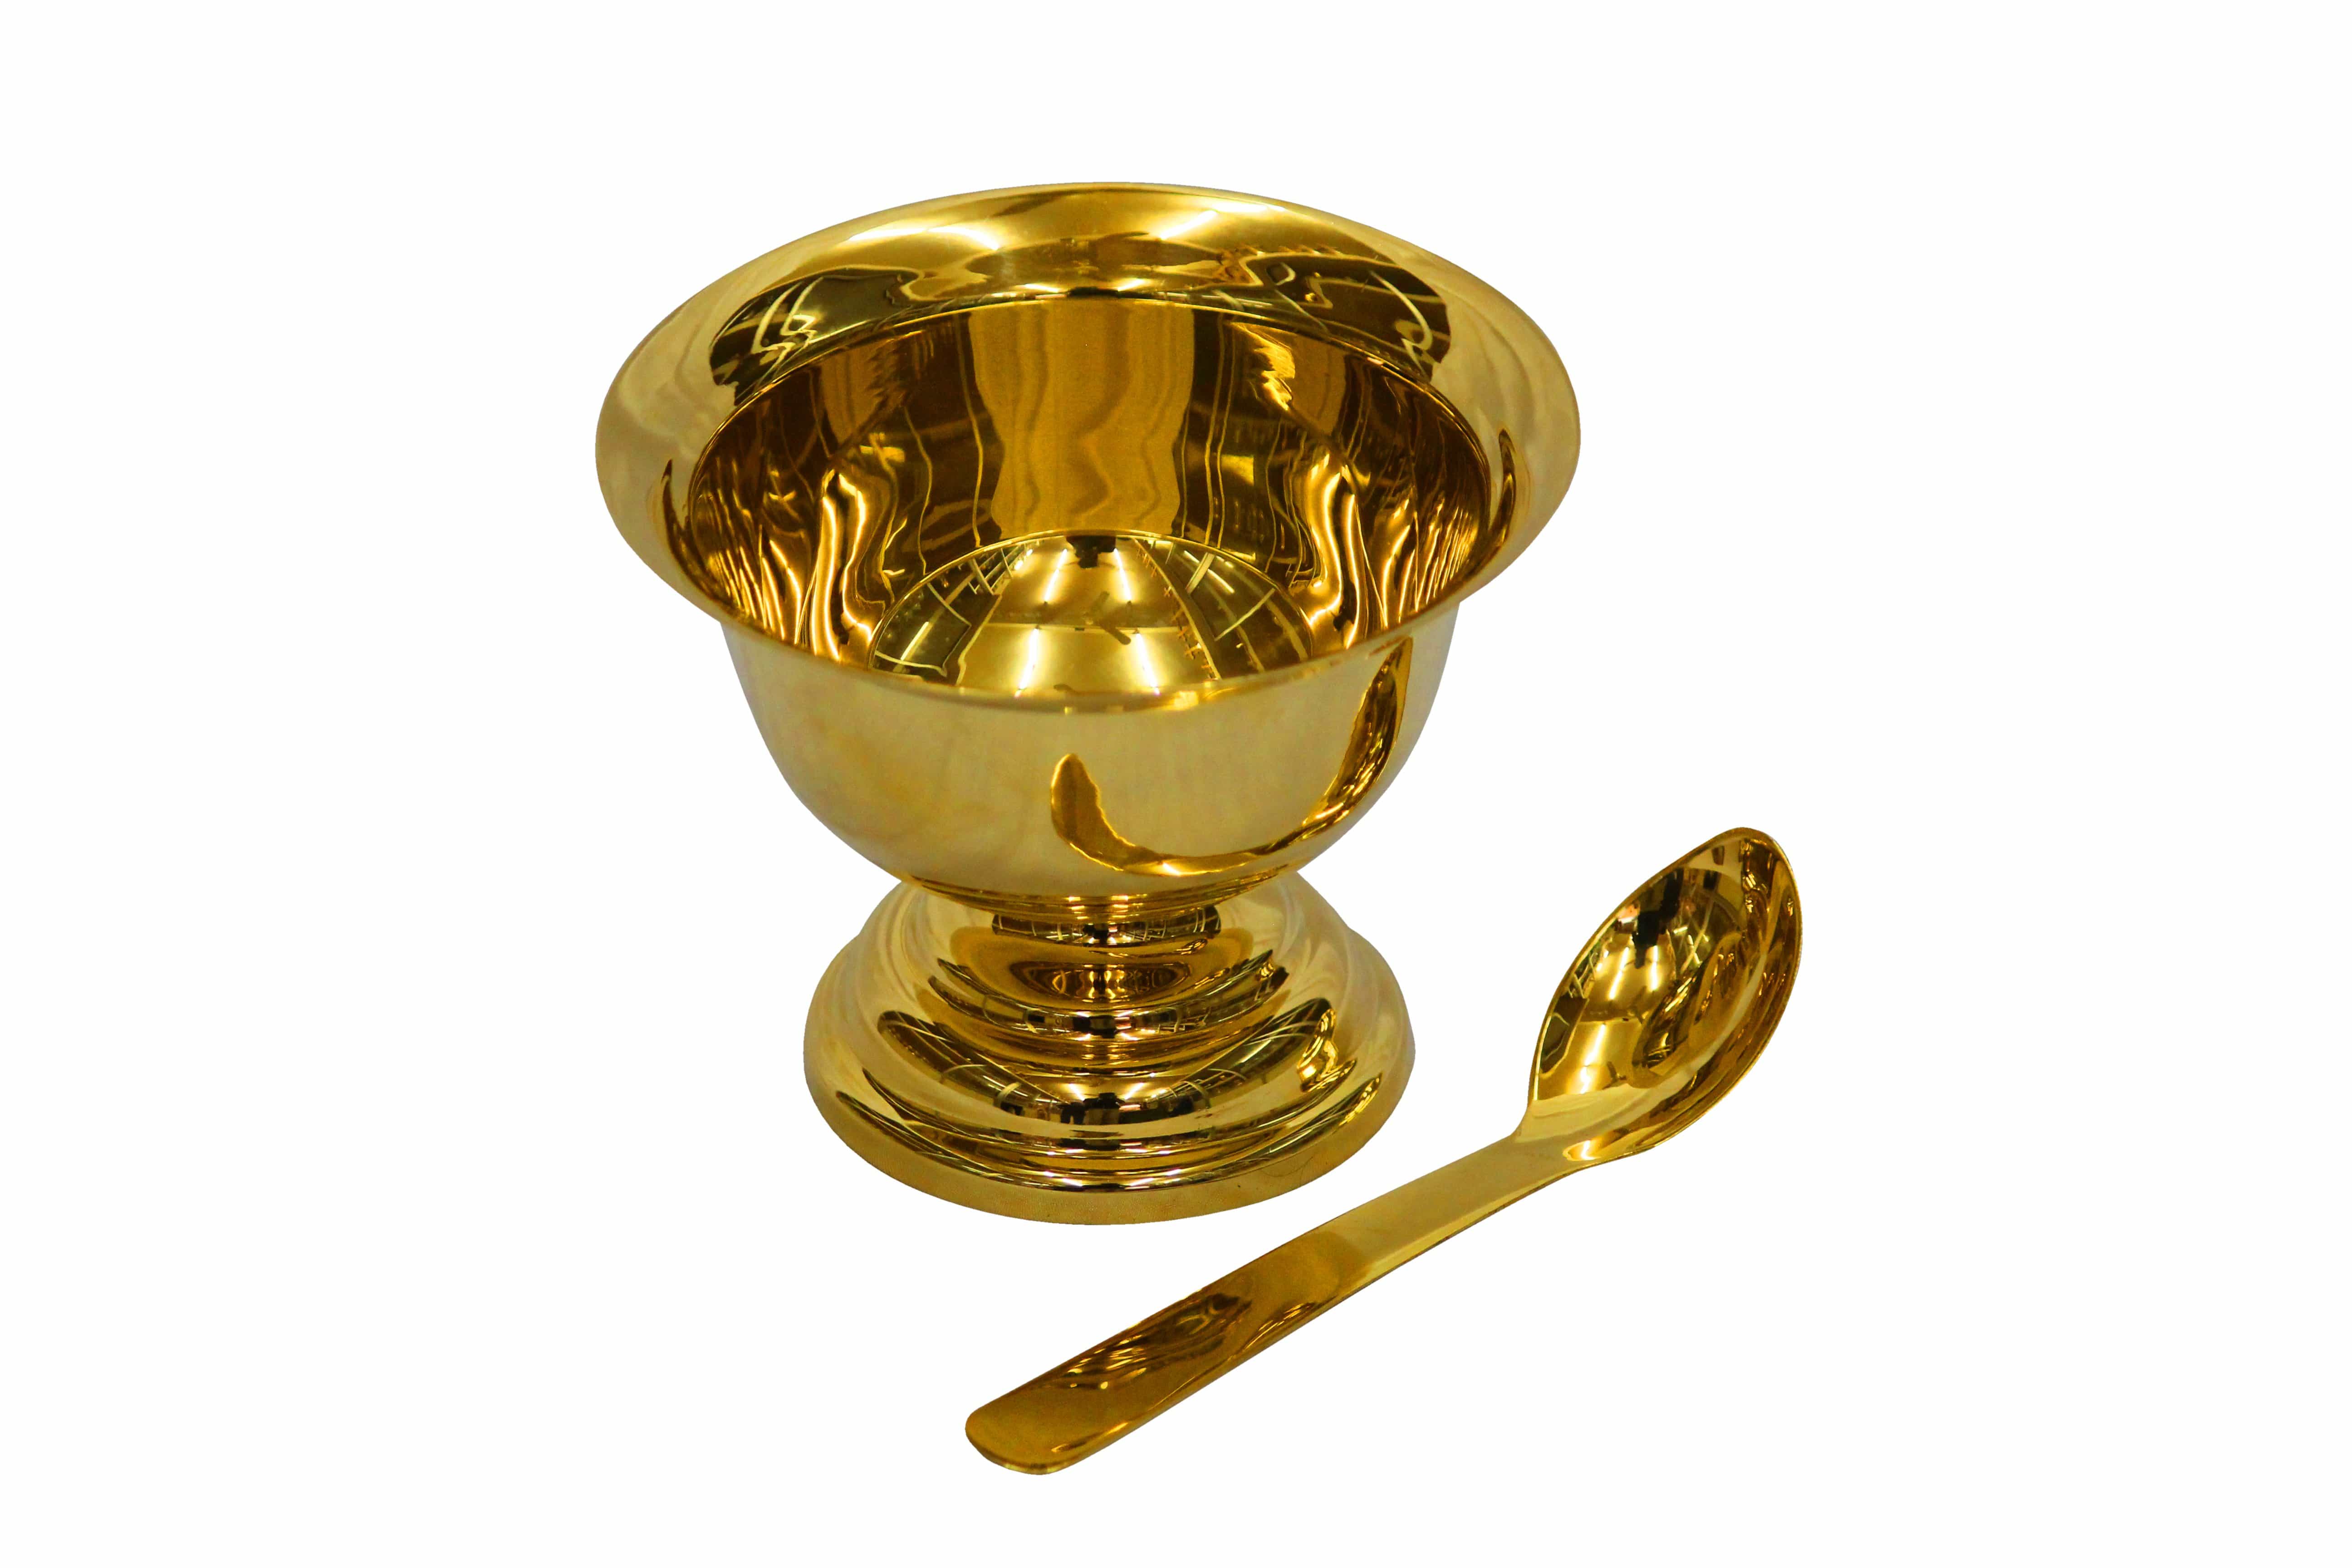 Living Words Church Articles Incense Boat - Gold plated